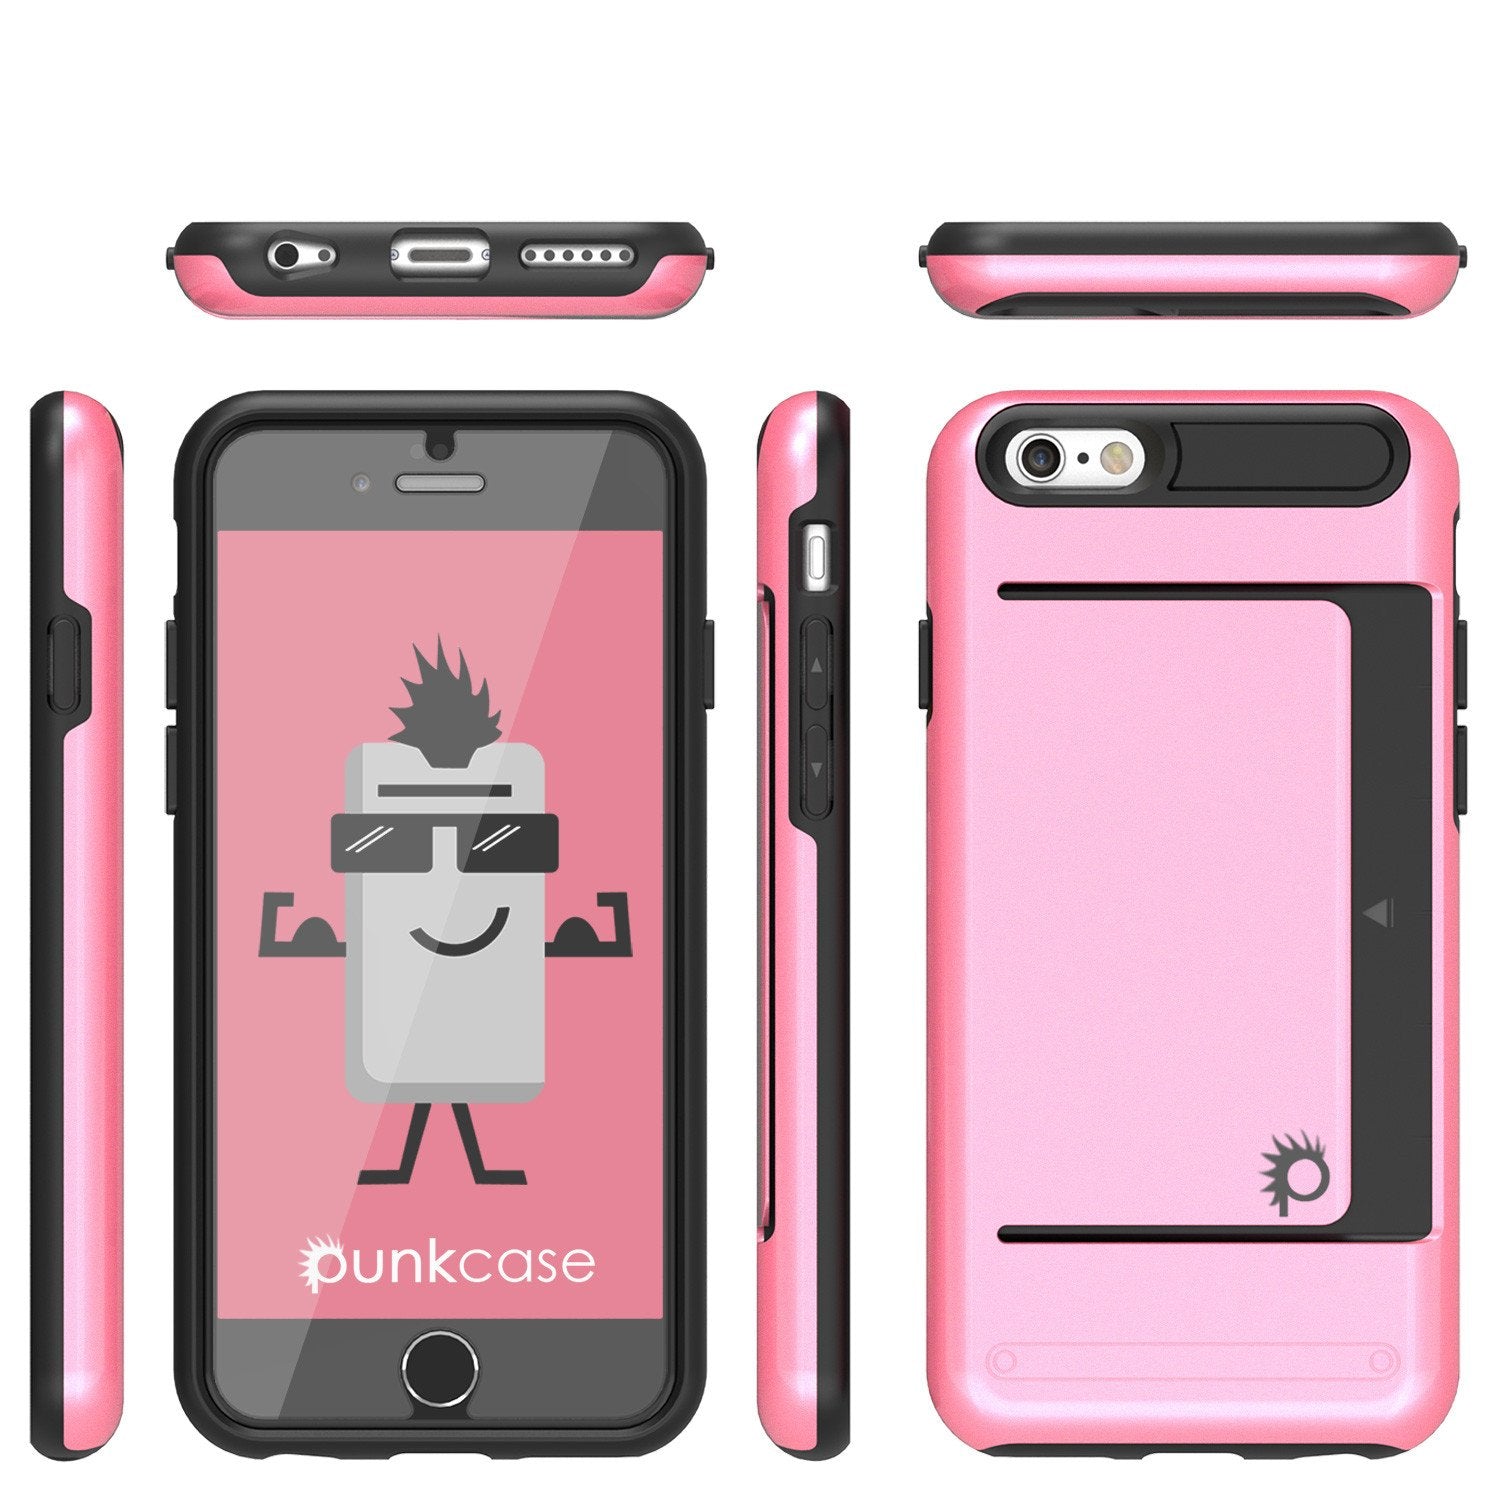 iPhone 6/6s Case PunkCase CLUTCH Pink Series Slim Armor Soft Cover Case w/ Tempered Glass